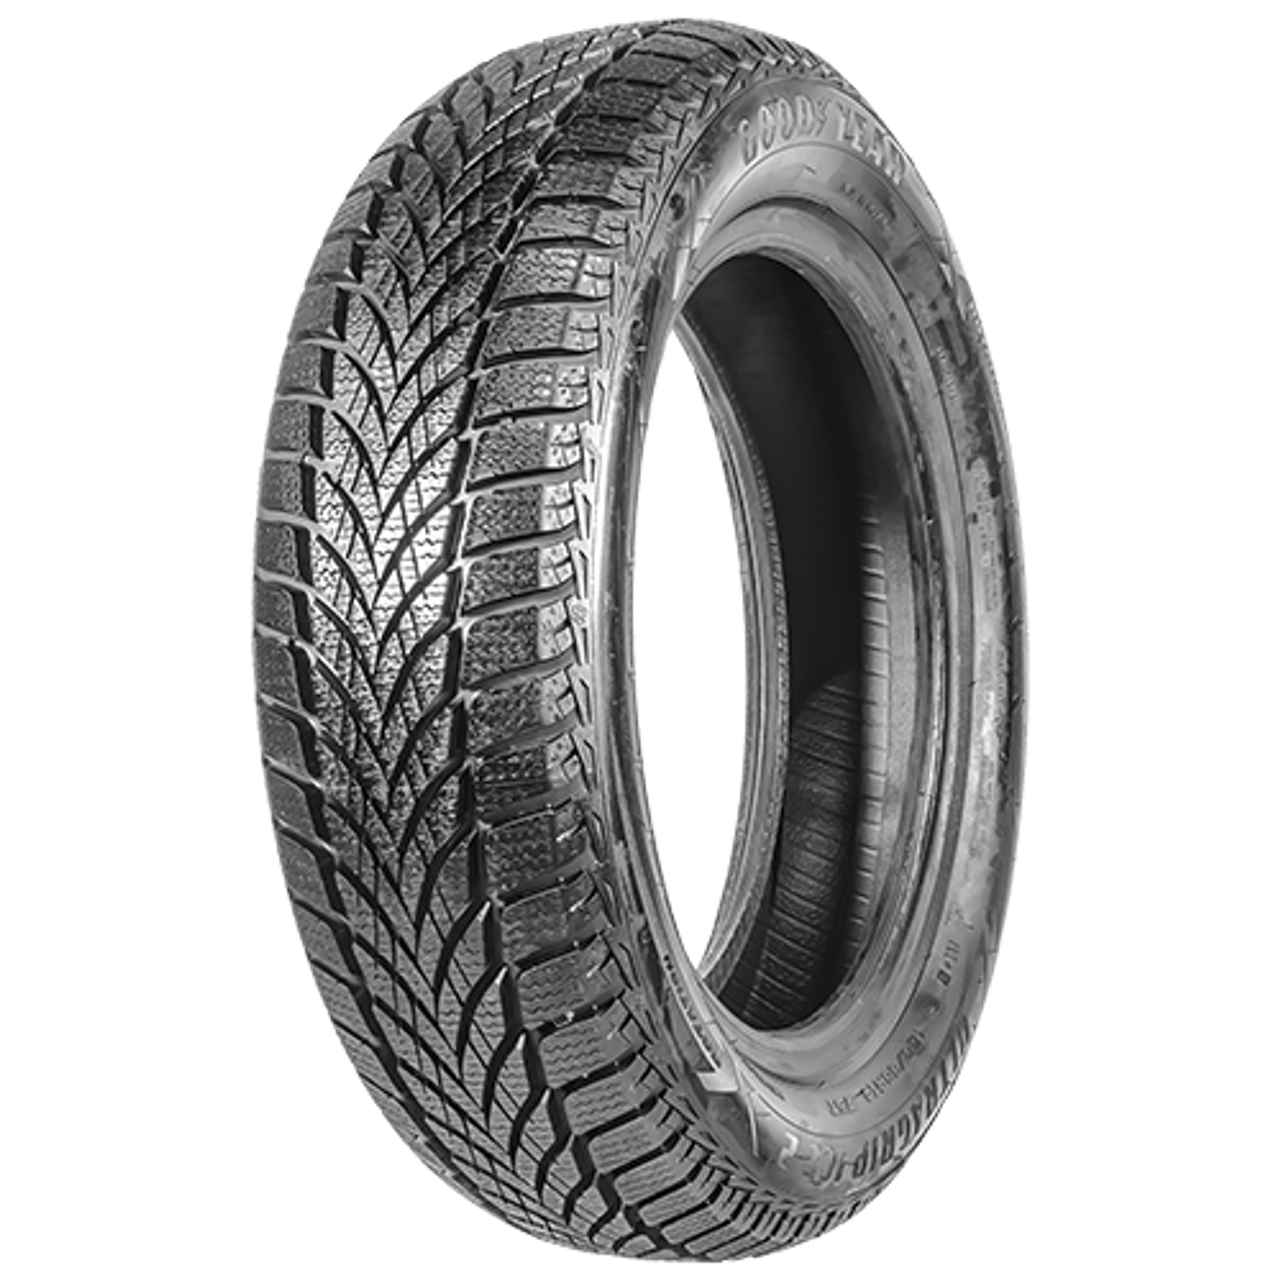 GOODYEAR ULTRAGRIP ICE 2 185/60R15 88T NORDIC COMPOUND BSW